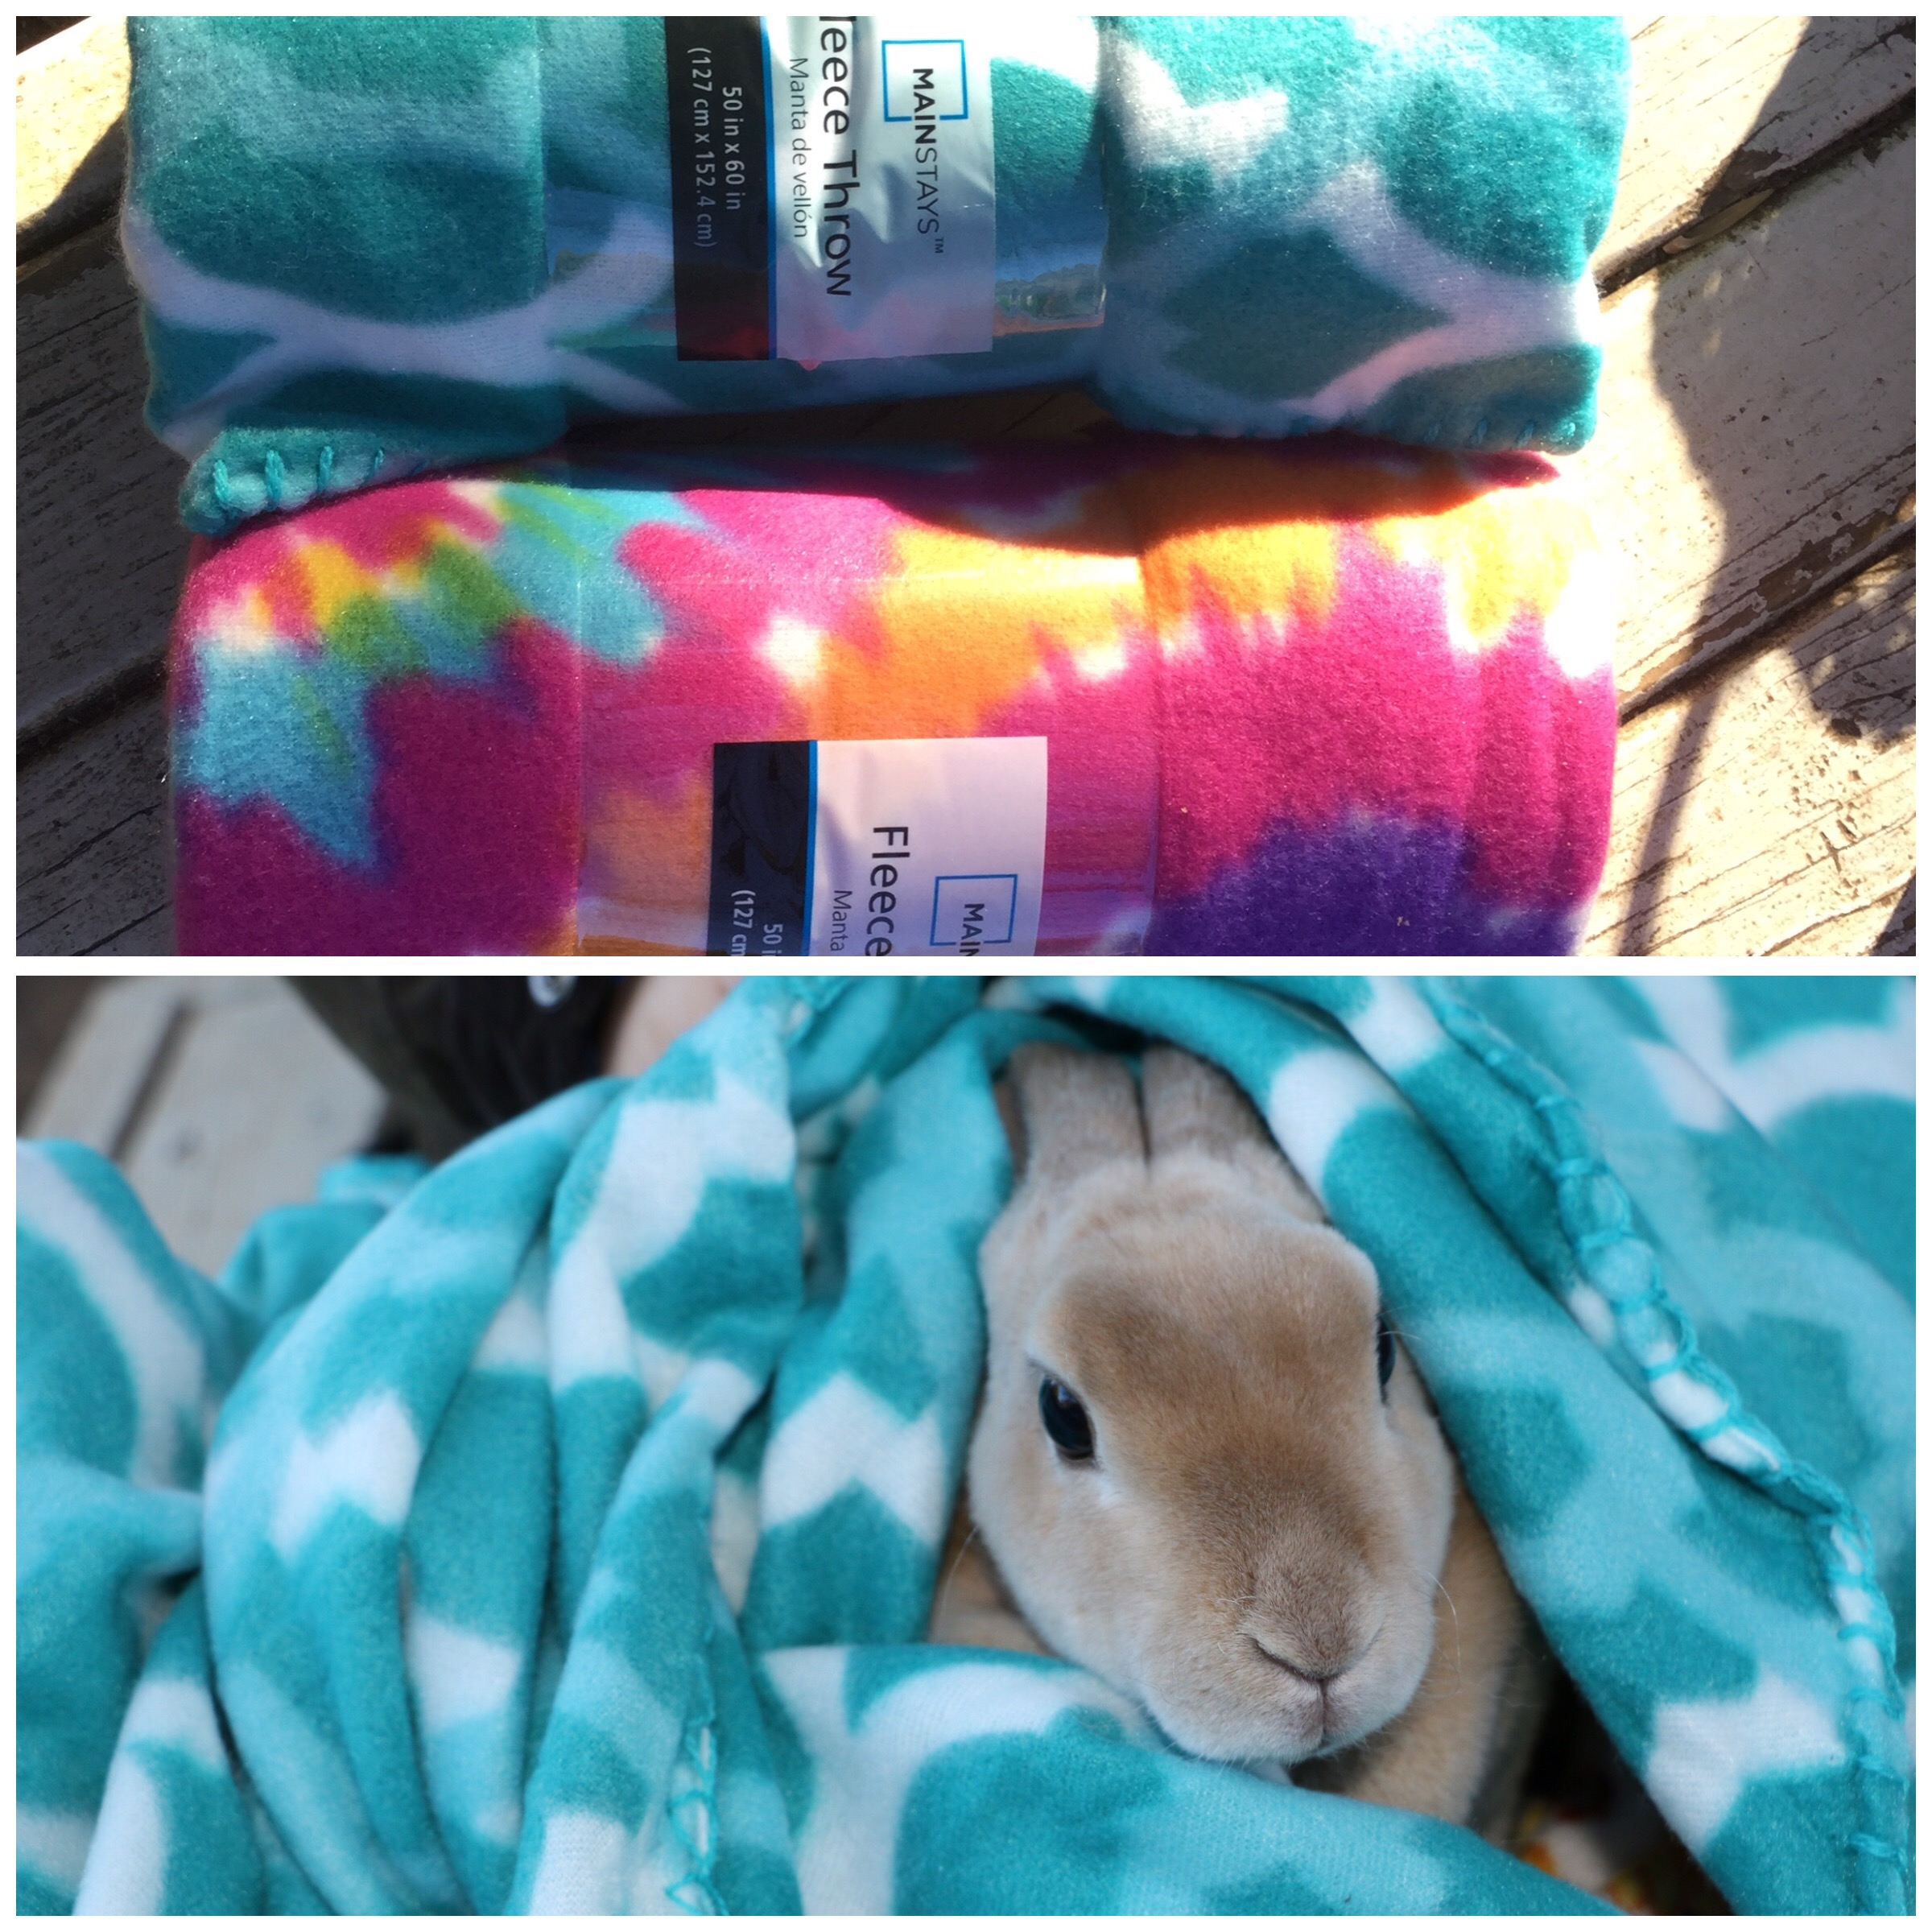 FLEECE BLANKET DONATIONS APPRECIATED BY ANIMALS AS COLD WEATHER NEARS ...